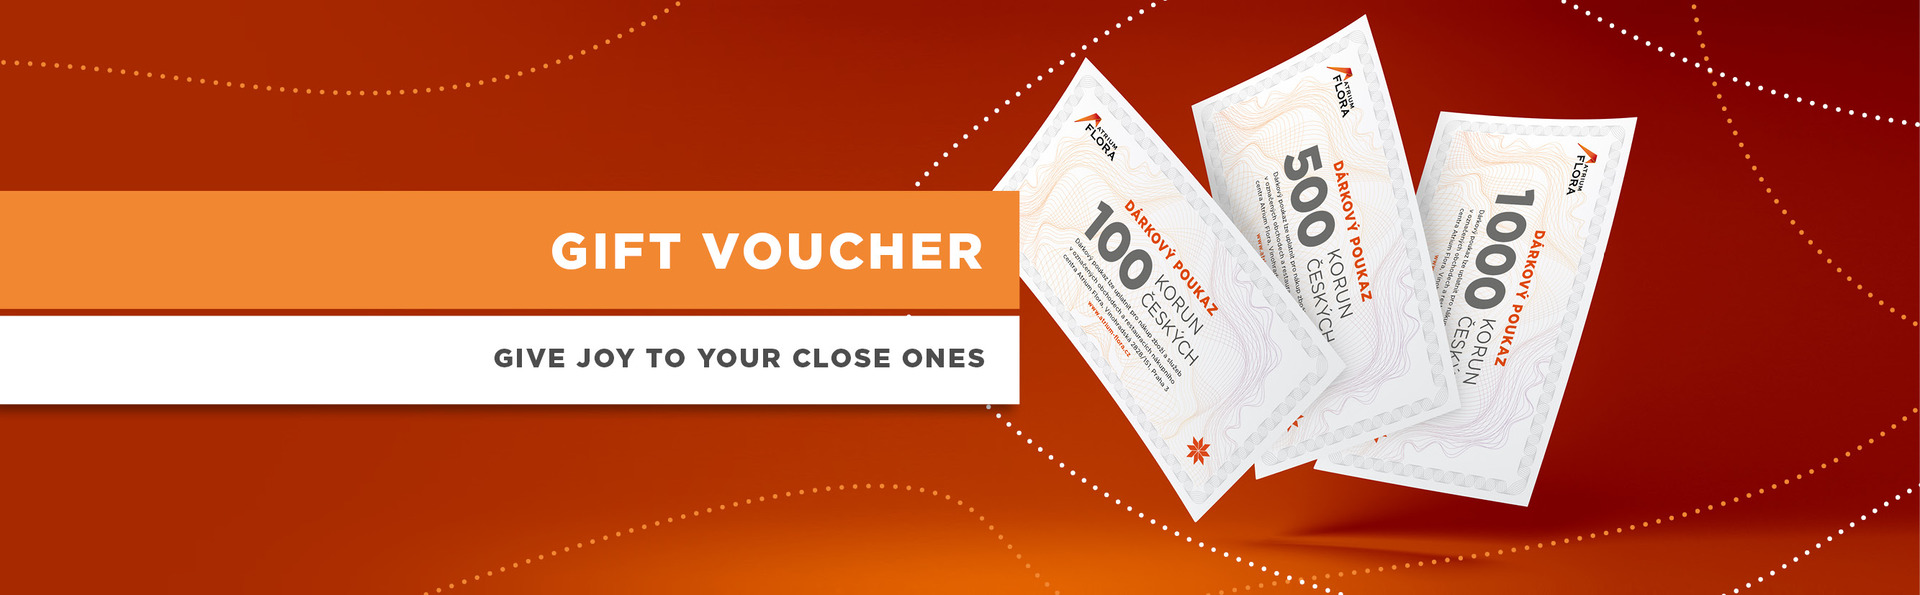 GIFT VOUCHERS – GIVE YOU TO YOUR CLOSE ONES